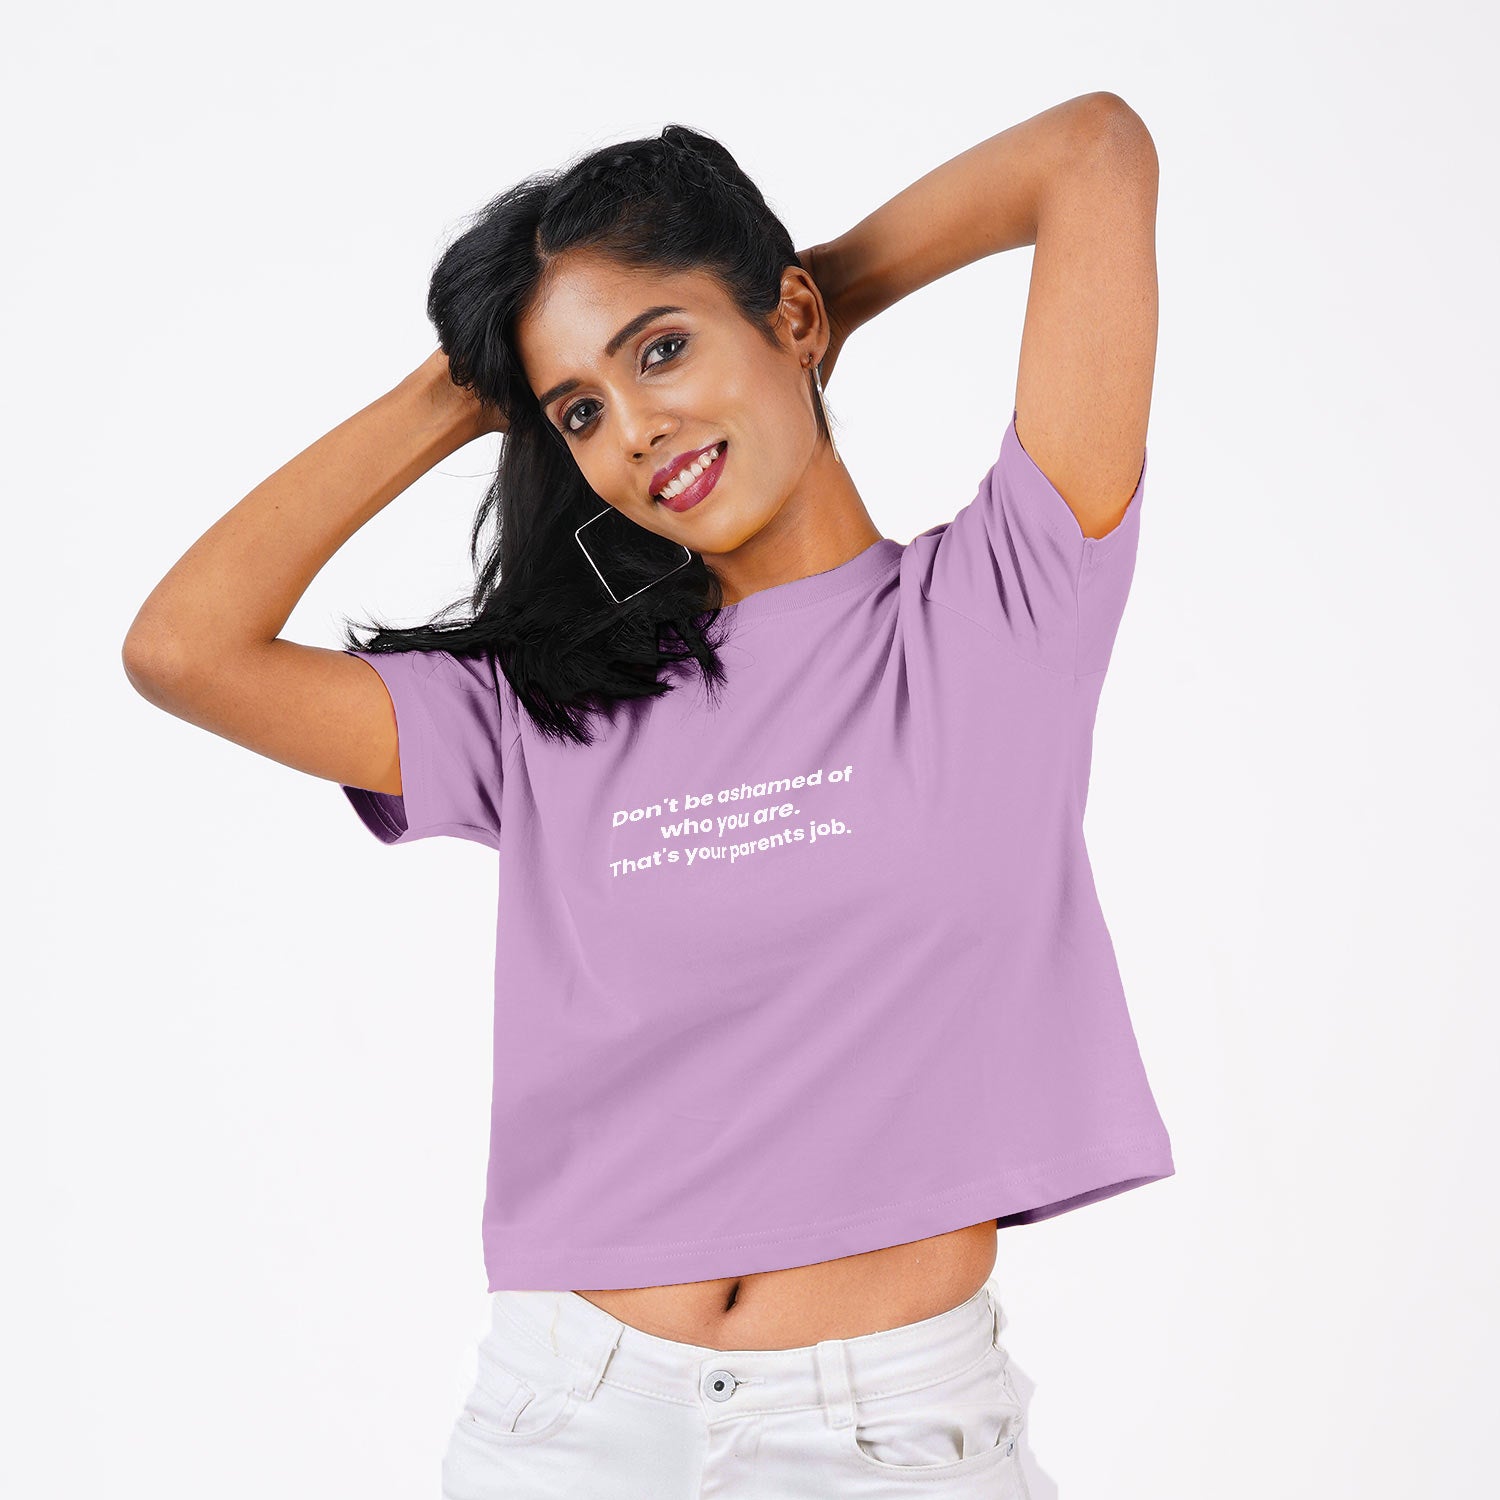 Don't Be Ashamed Of Who You Are - Crop Top